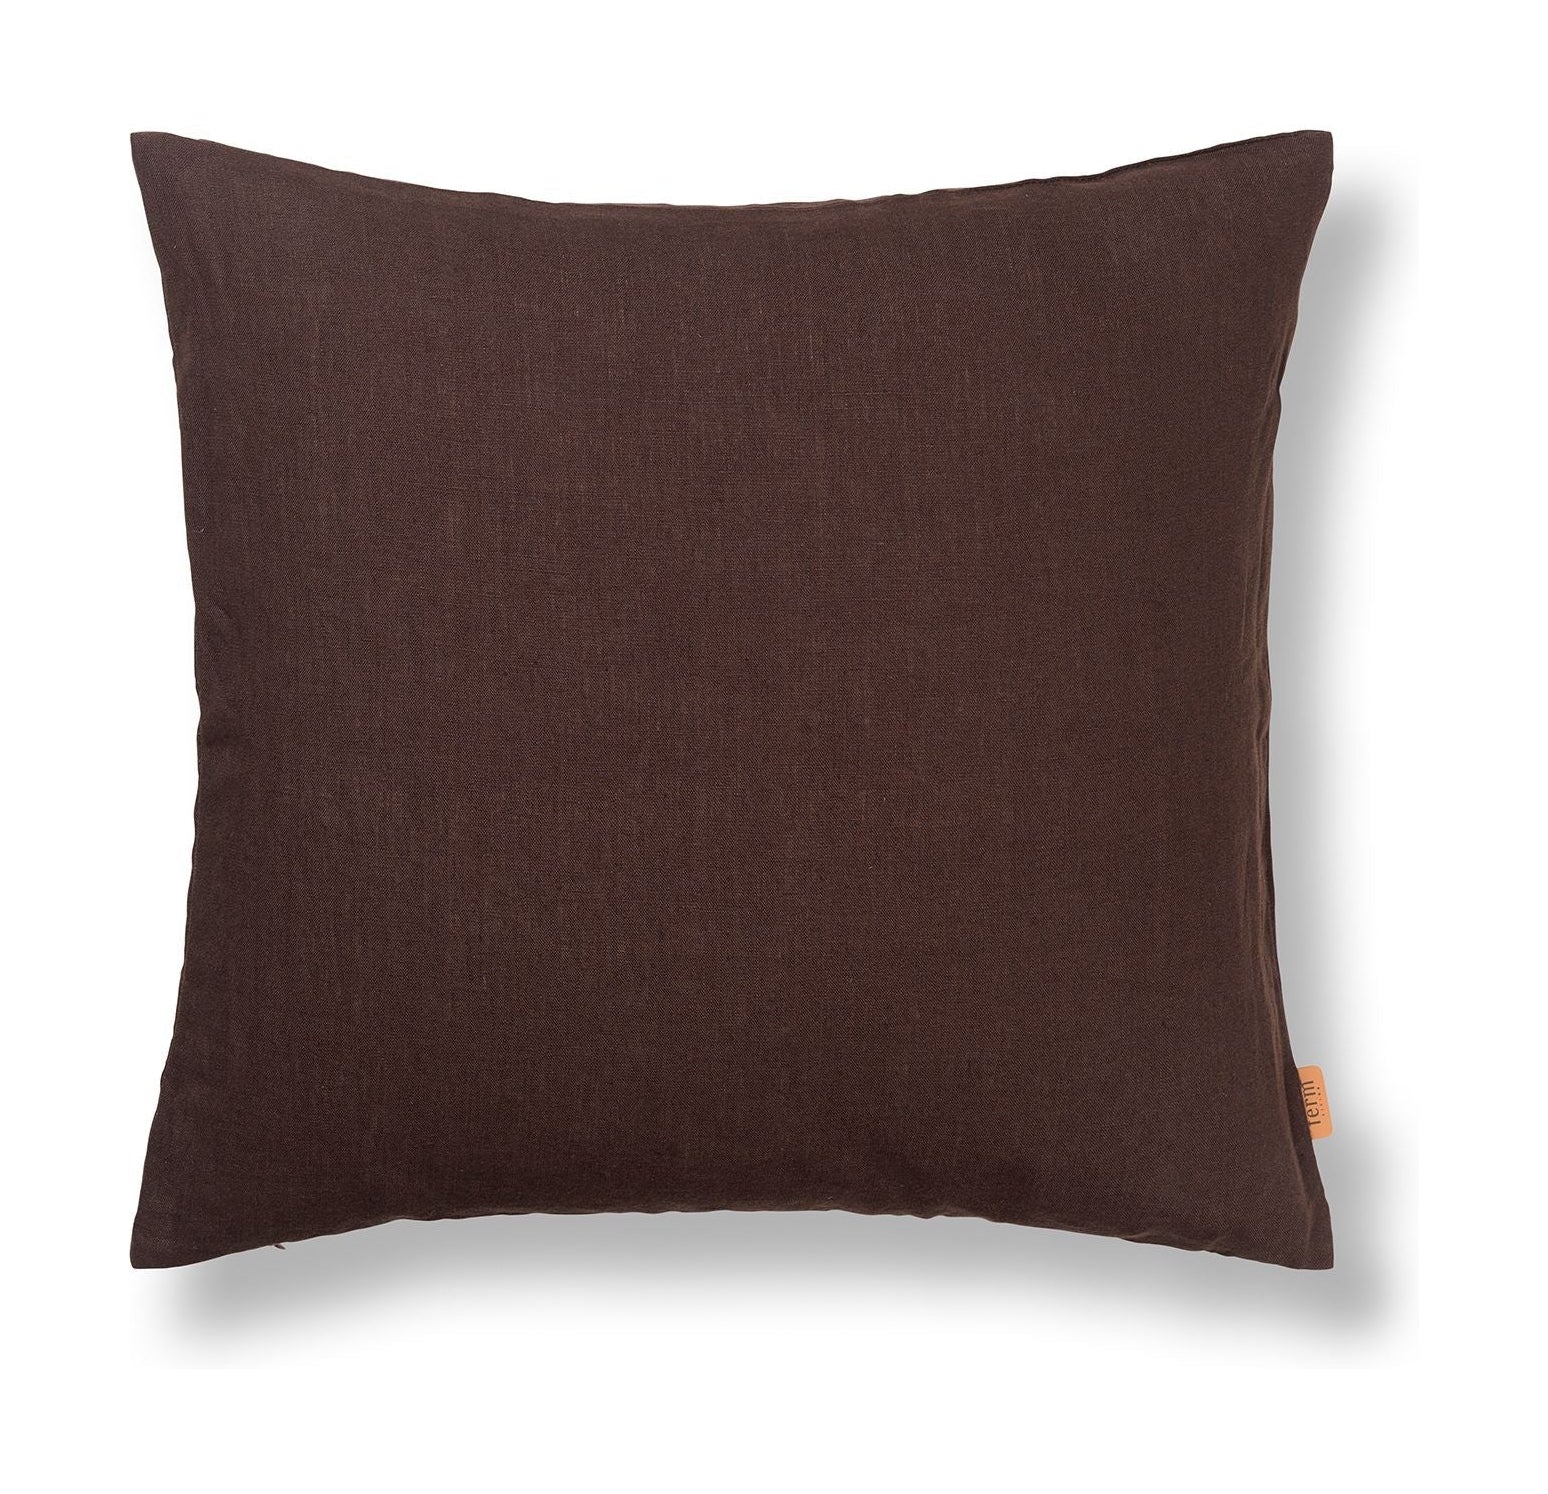 Ferm Living Linen Pude Cover, Chocolate